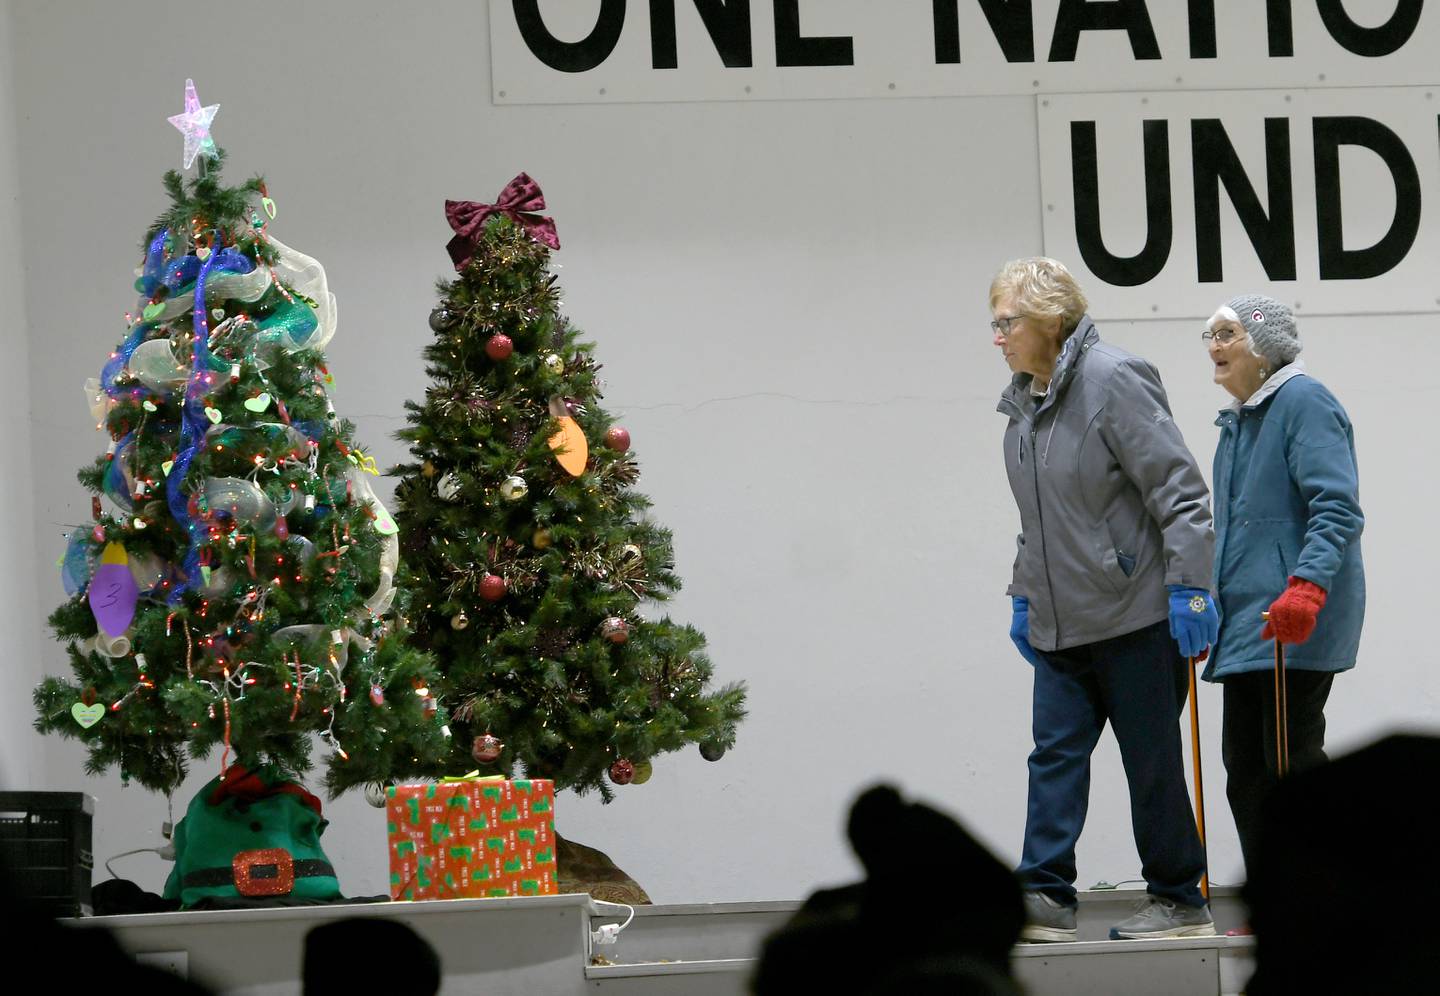 Mt. Morris residents Salley Wessels and Carol Reckmeyer look over some of the decorated Christmas trees during the voting period at the Festival of Lights in Mt. Morris on Dec.3. The evening event included free food, a lighted parade, caolers, and Santa Claus.